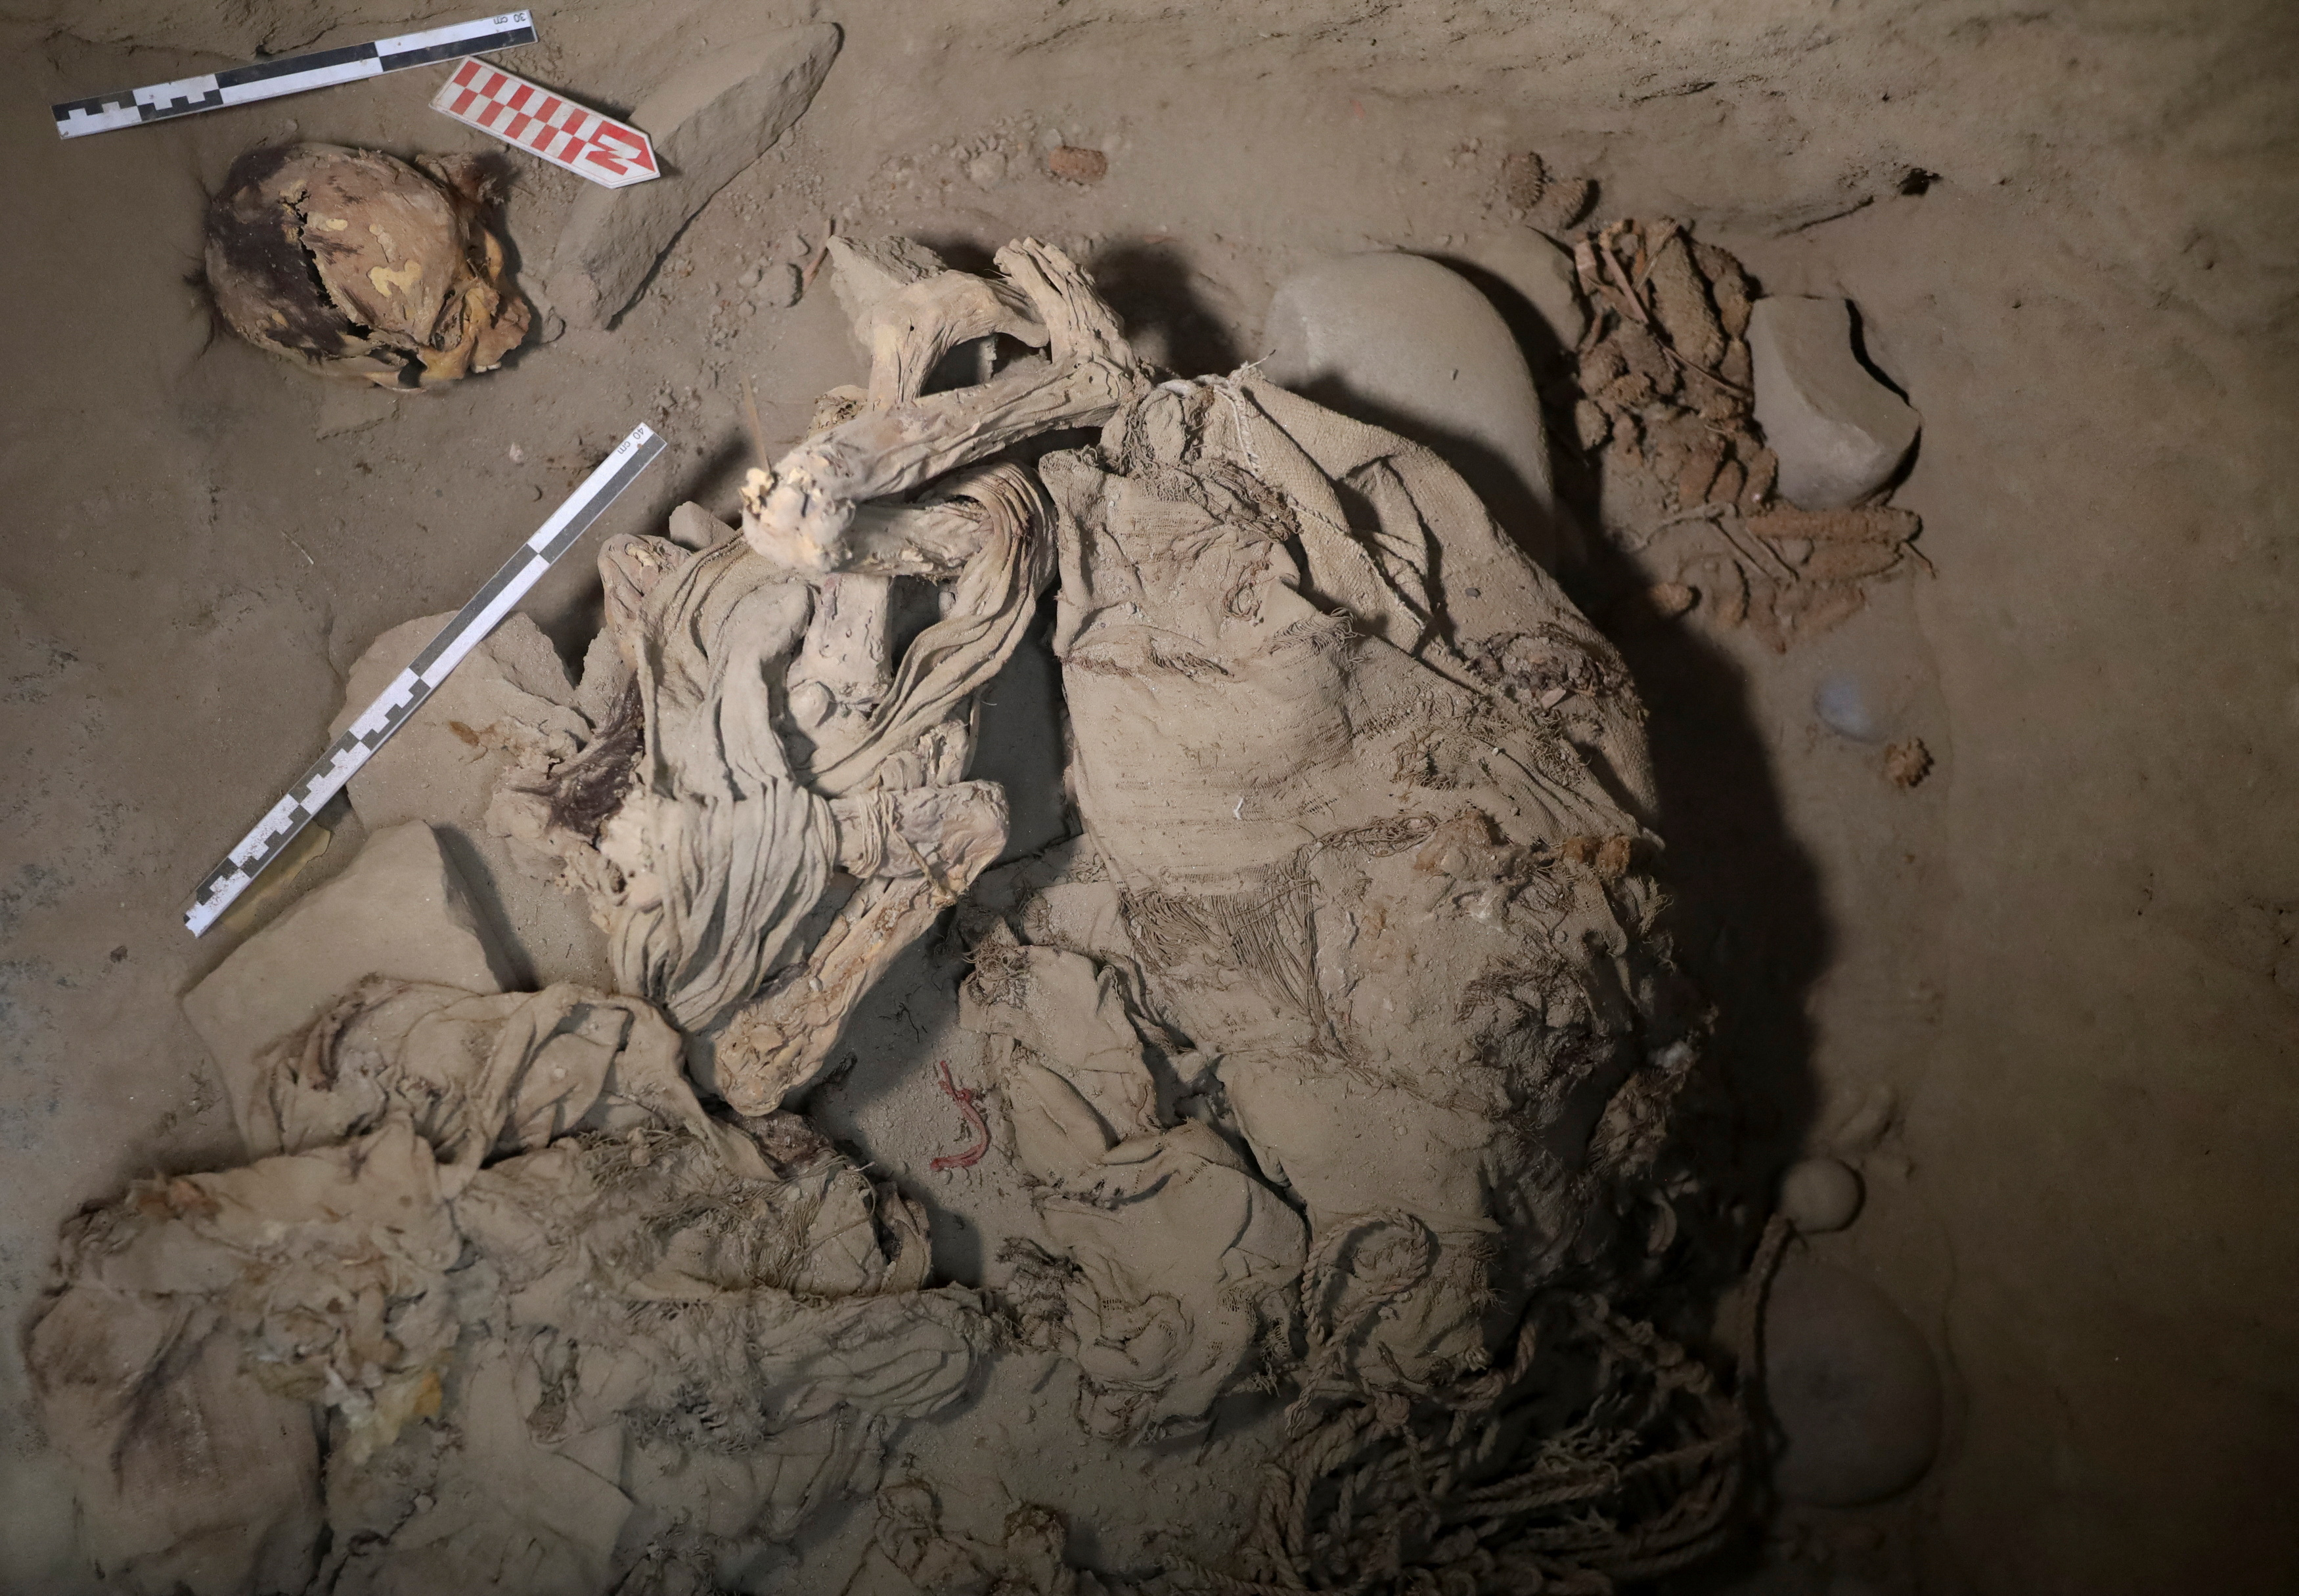 Peruvian archaeologists discover pre-Inca mummy in the ruins of Cajamarquilla in Lima